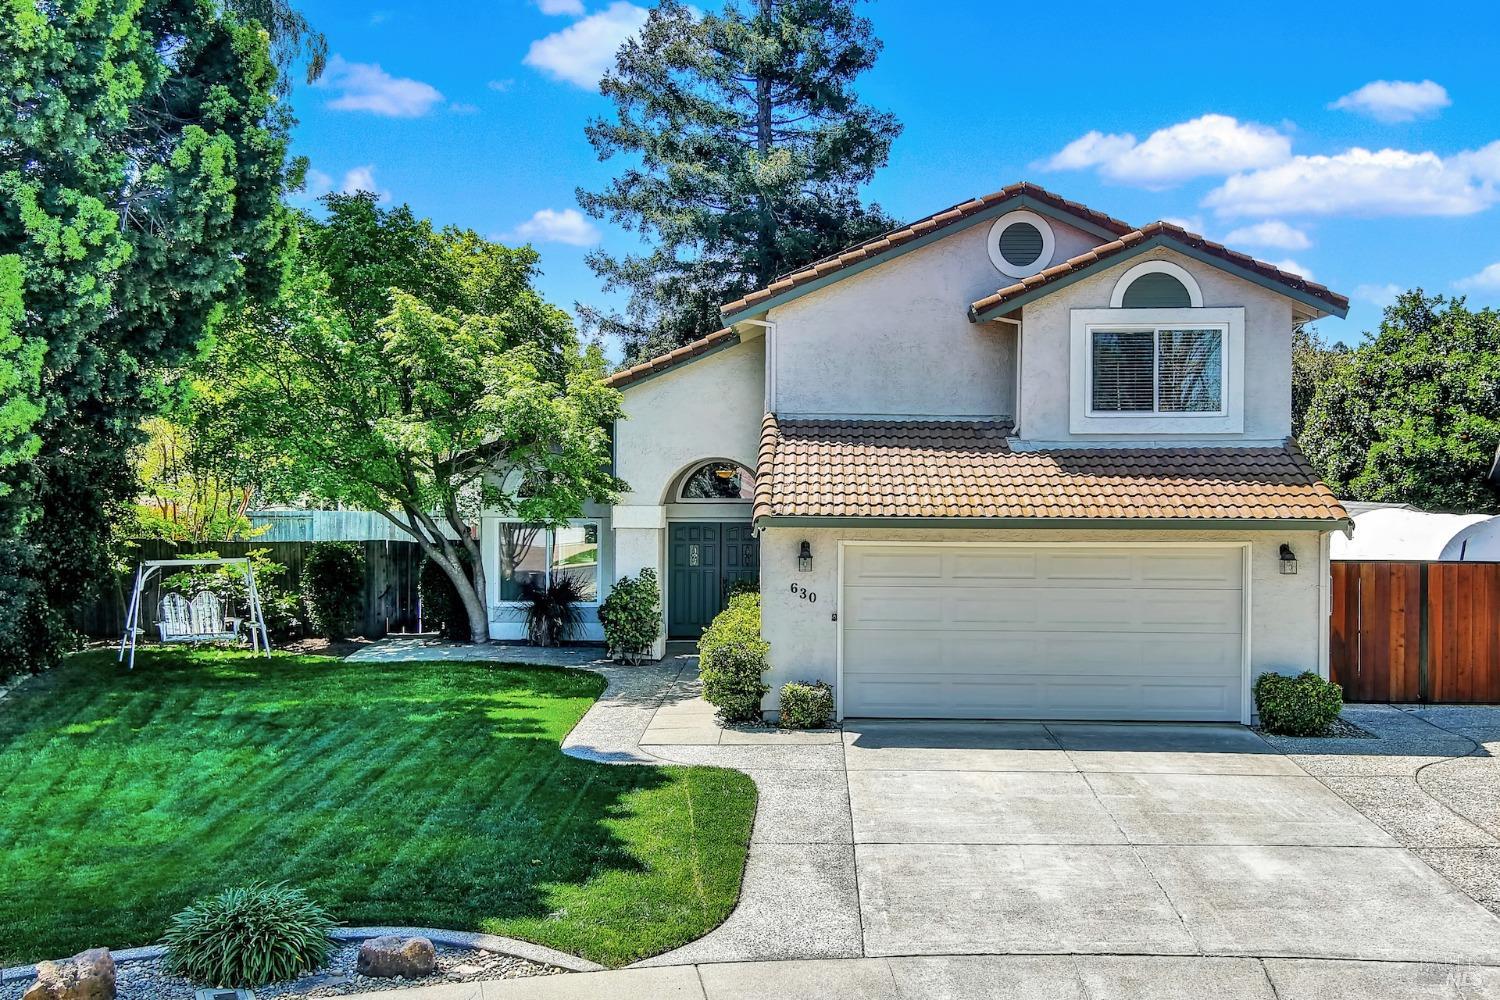 Photo of 630 Sunnyvale Pl in Vacaville, CA